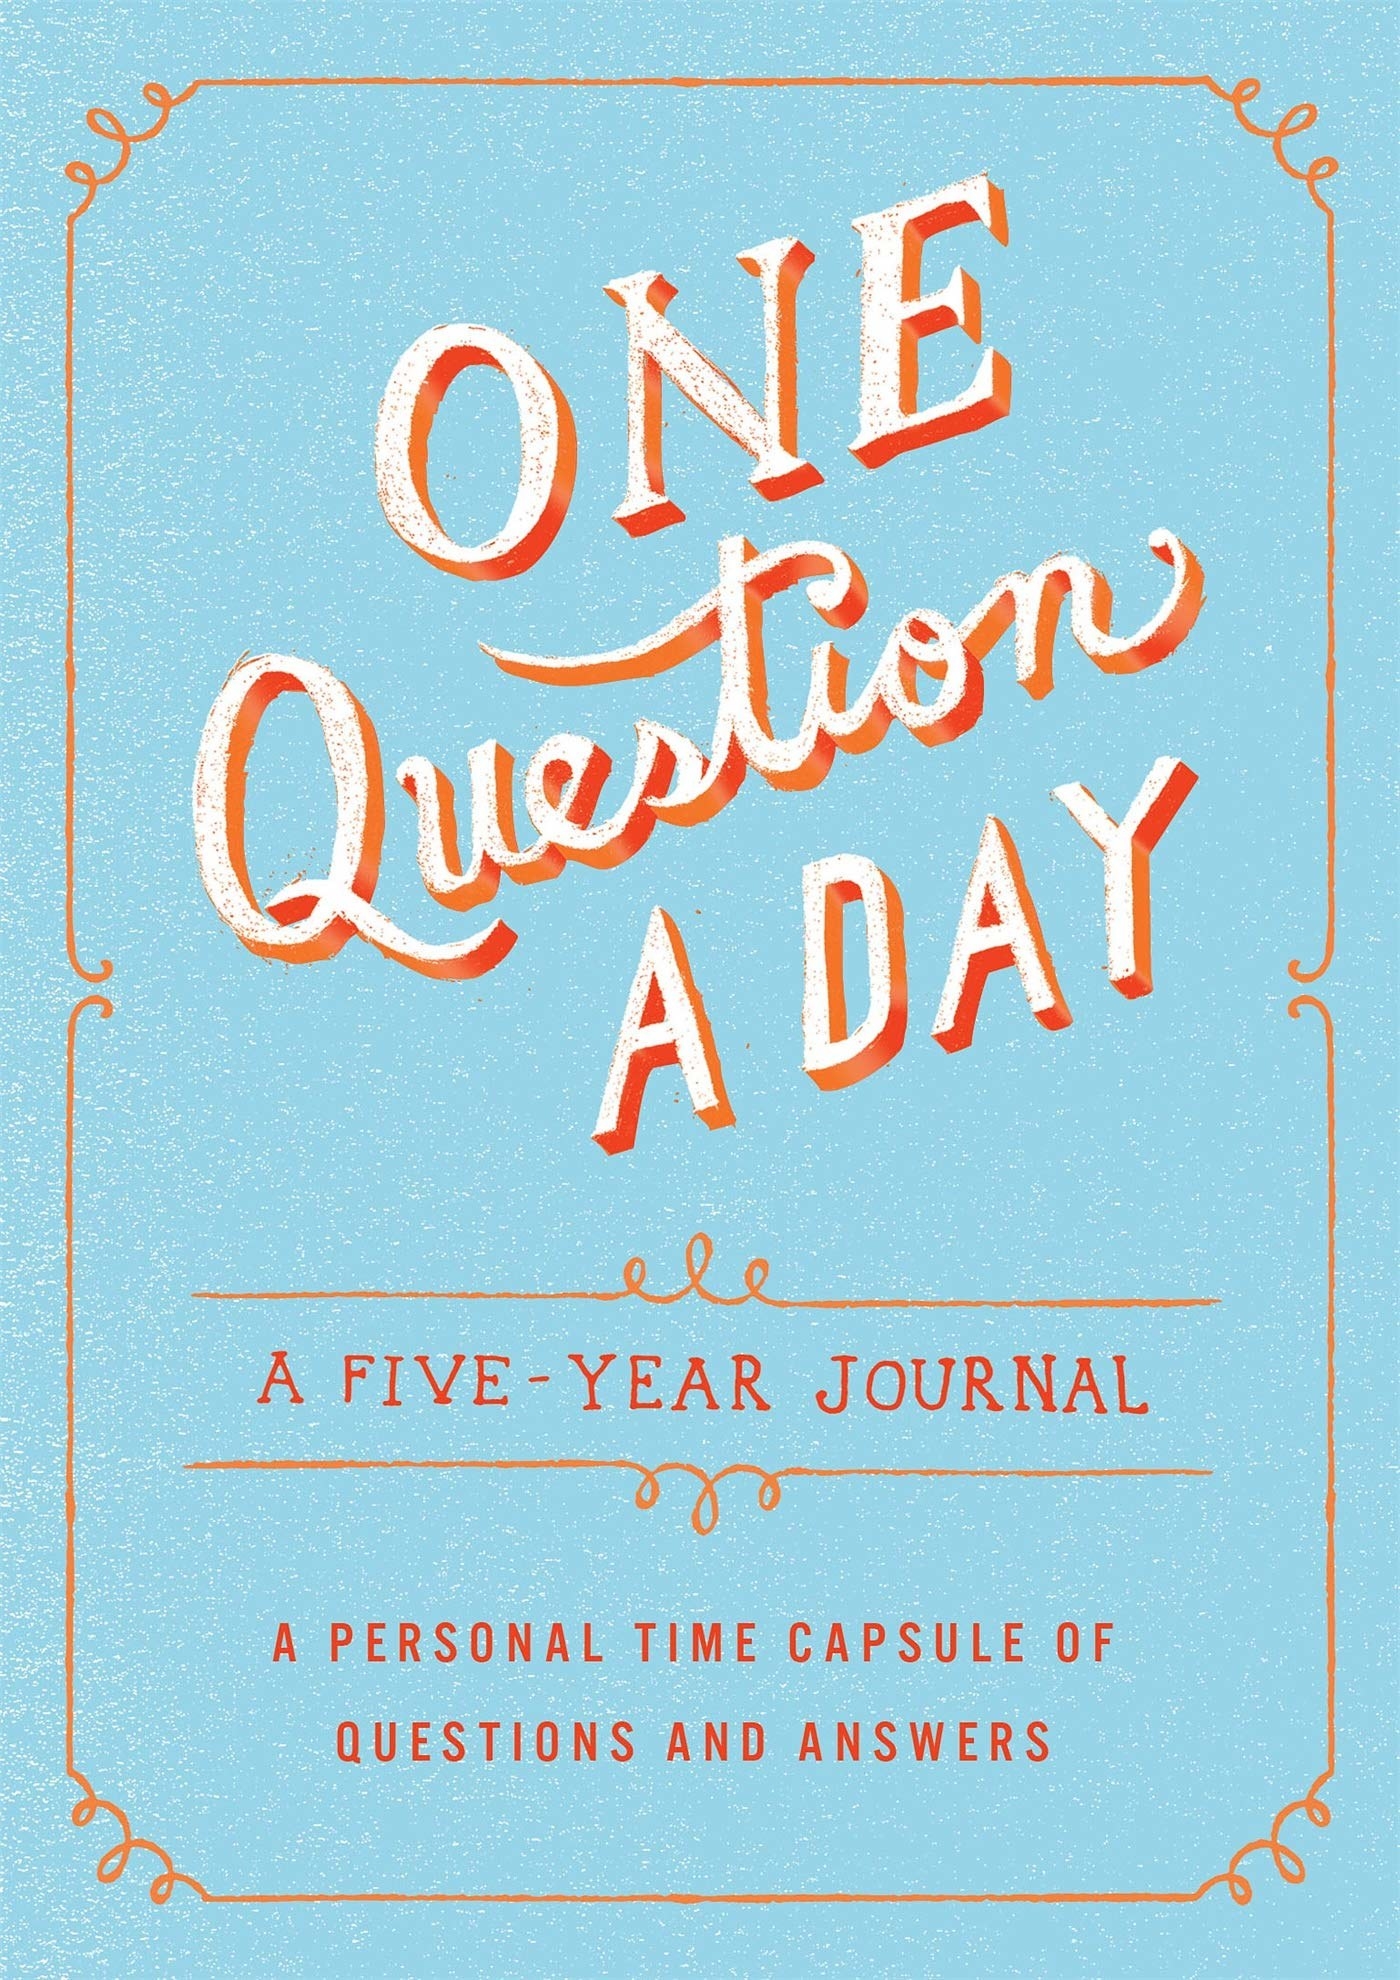 A 5-year journal cover